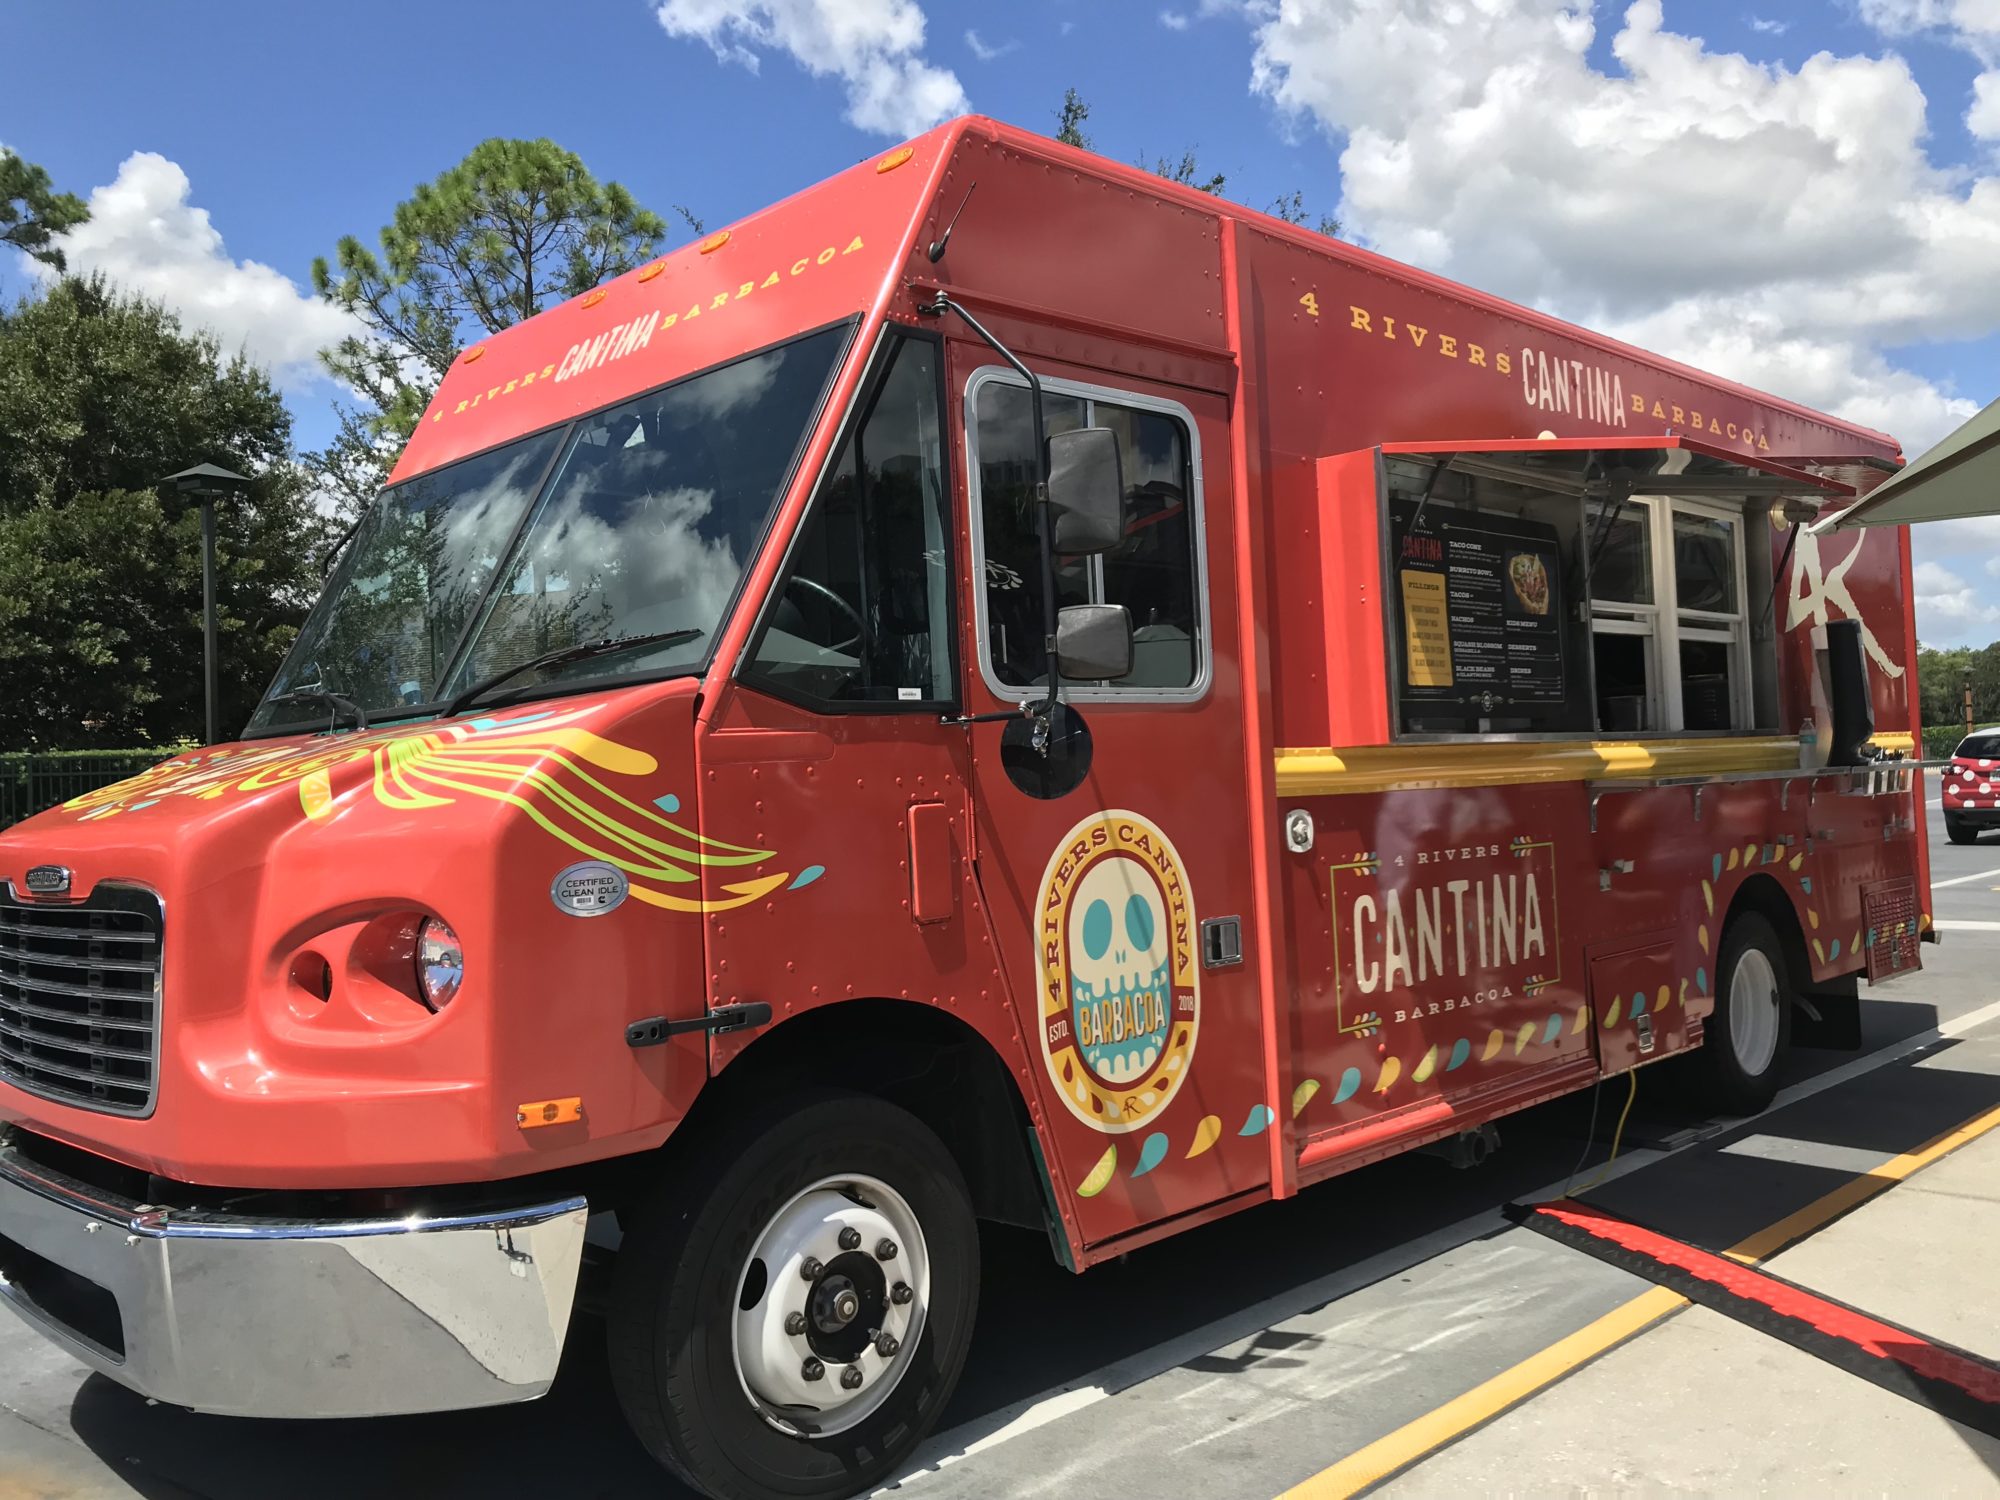 Review: Sneak Preview of 4Rivers Cantina Barbacoa Food Truck – Disney Springs